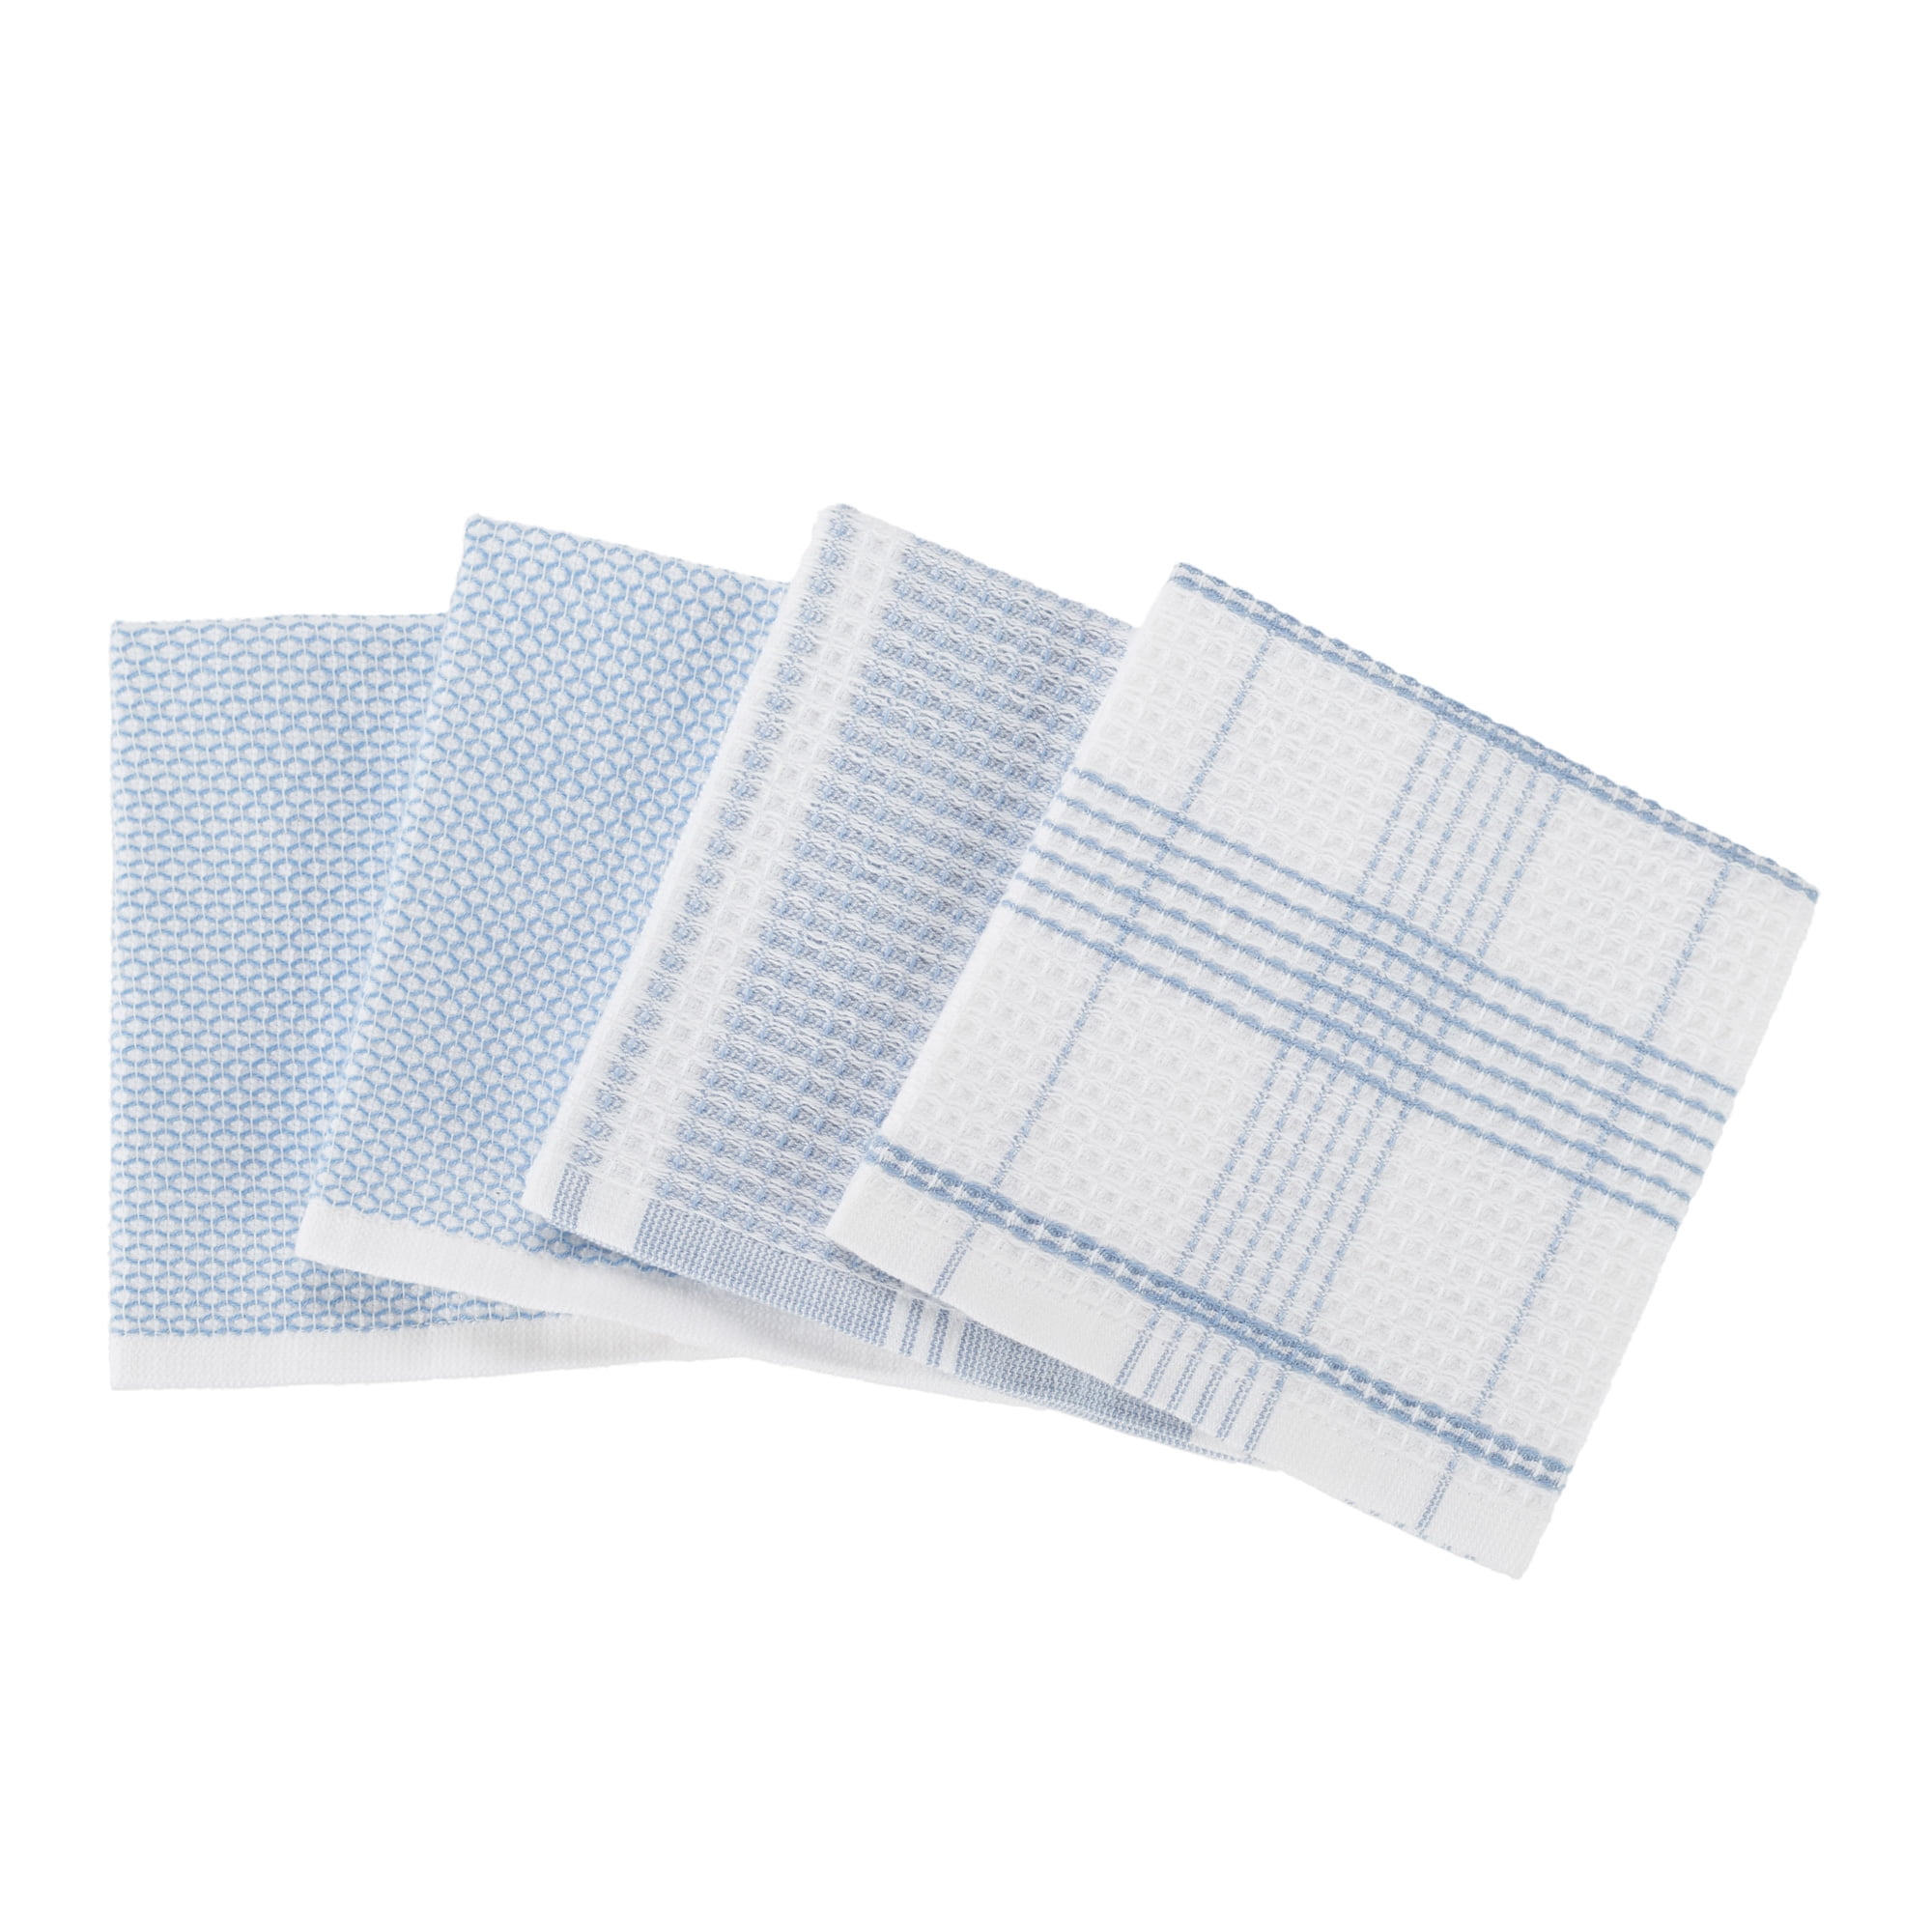 Everyday Living Solid Blue Dish Cloths, 4 pk - King Soopers